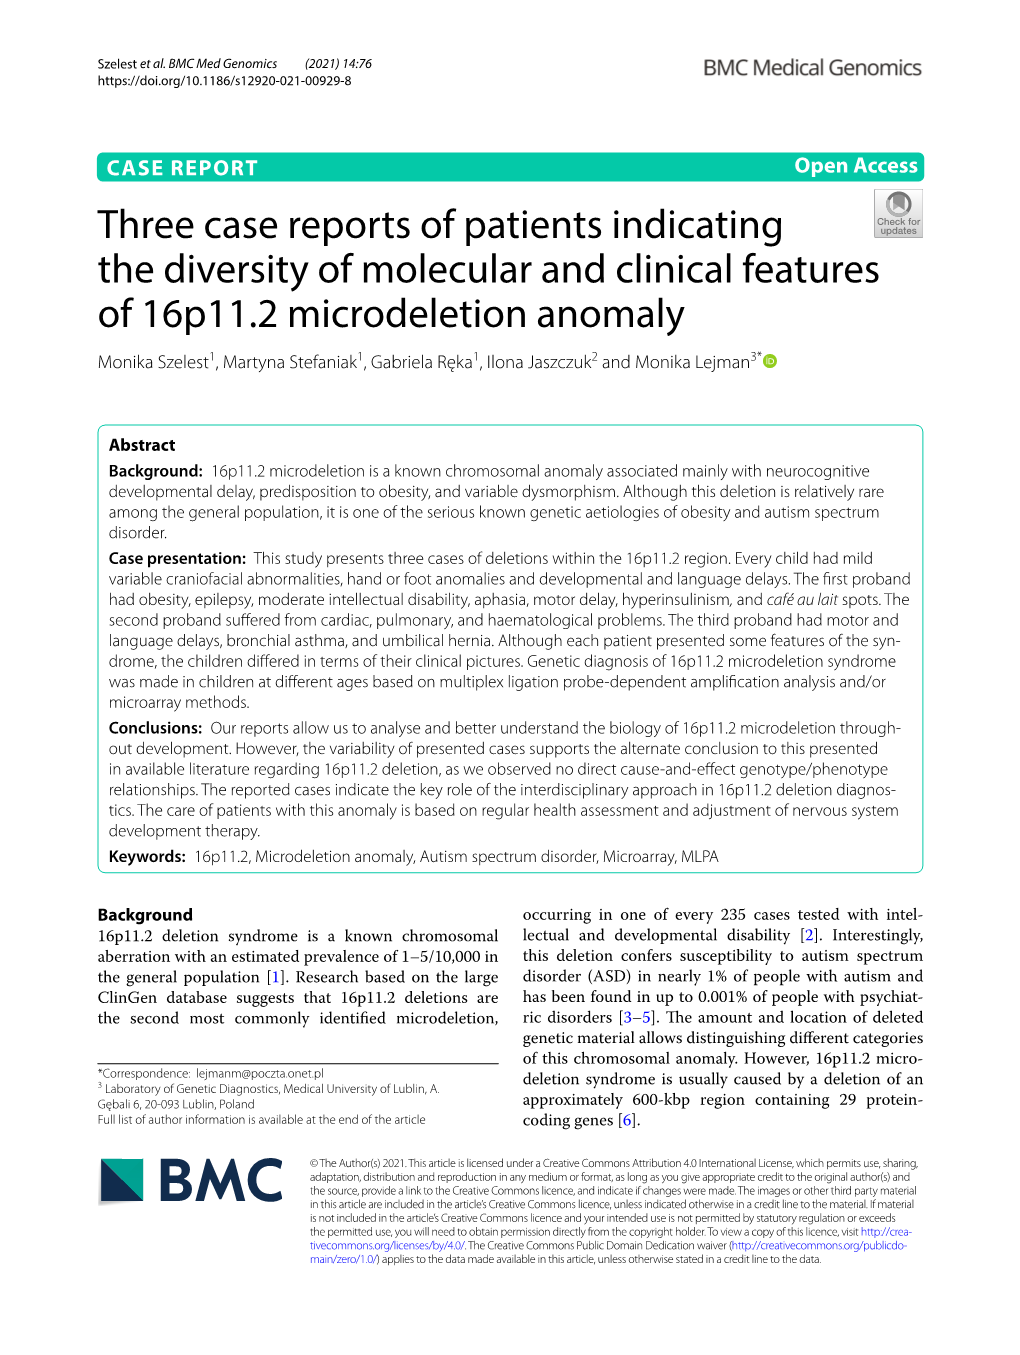 Three Case Reports of Patients Indicating the Diversity of Molecular